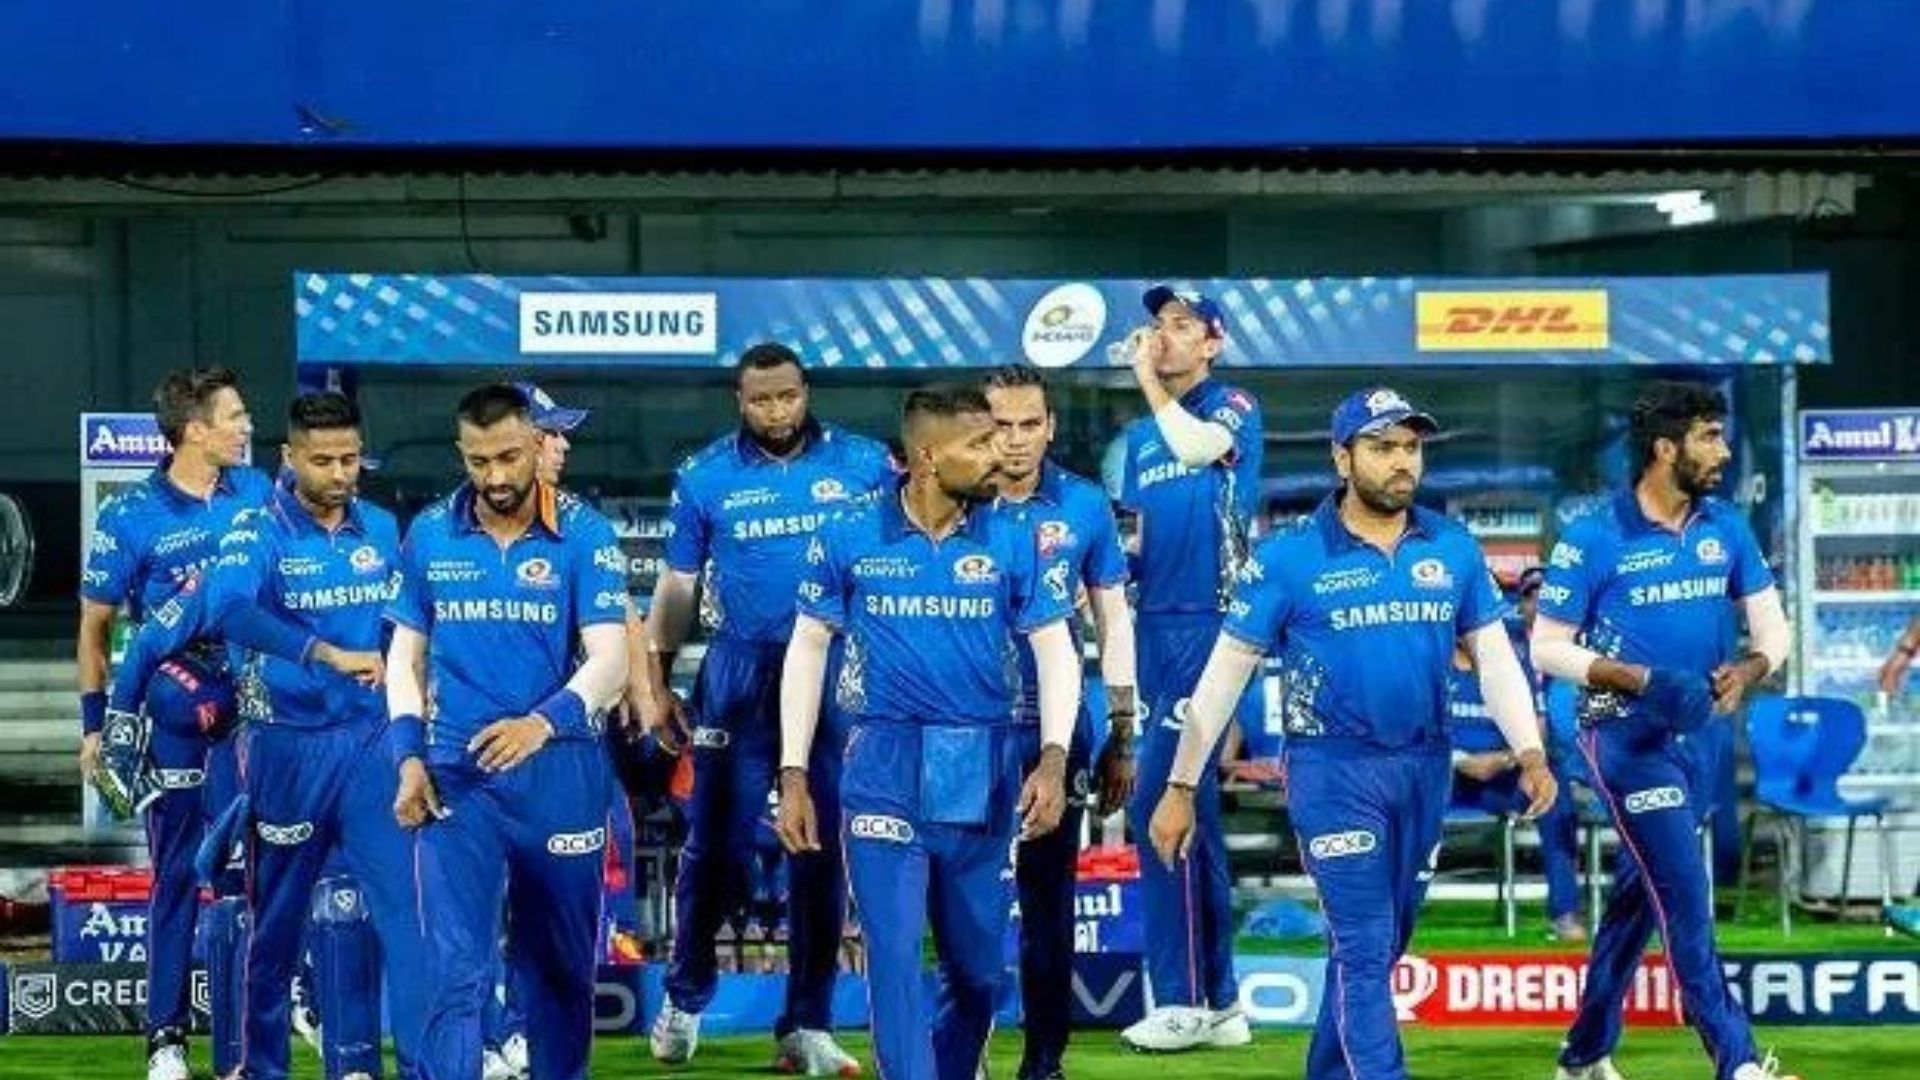 Mumbai Indians will be opening their IPL 2022 campaign against the Delhi Capitals